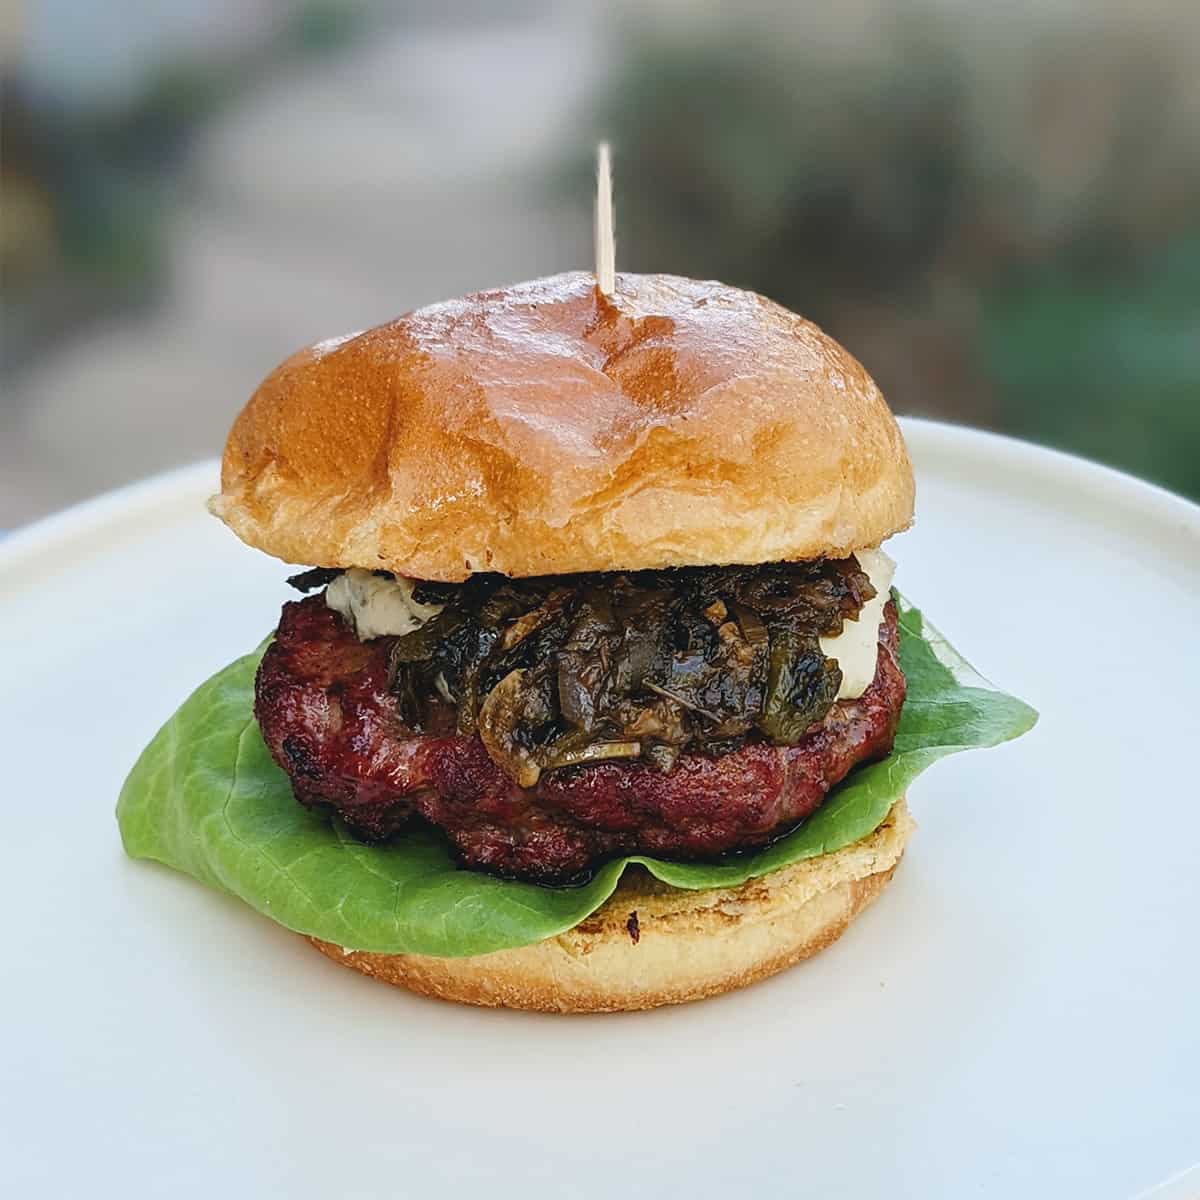 HDT Green Chile Cheeseburger - plated